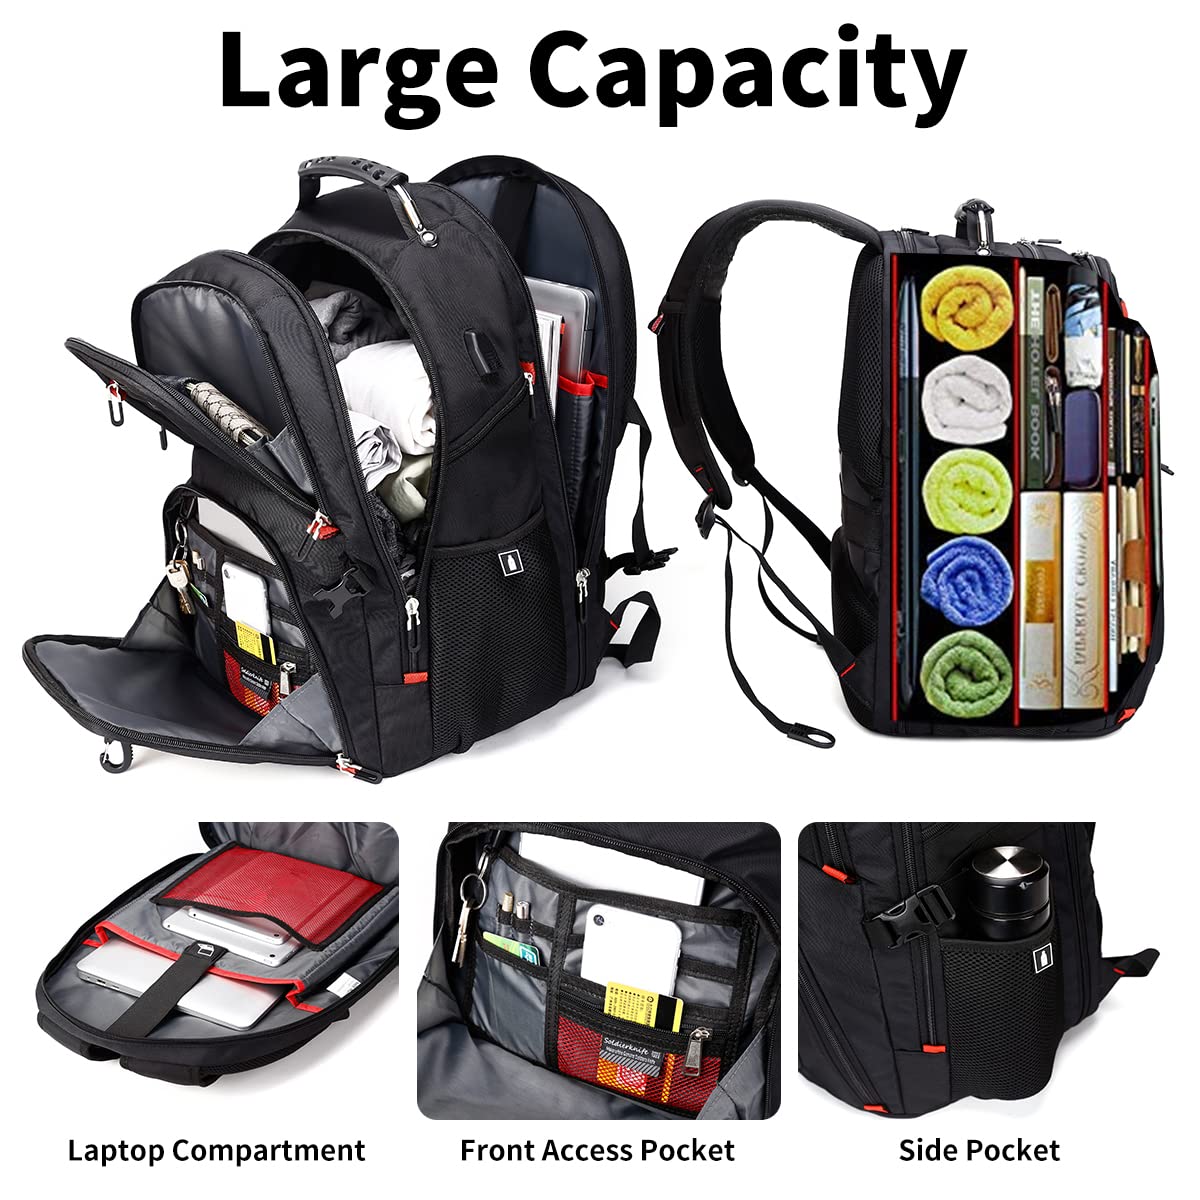 Extra Large 52L Travel Laptop Backpack with USB Charging Port